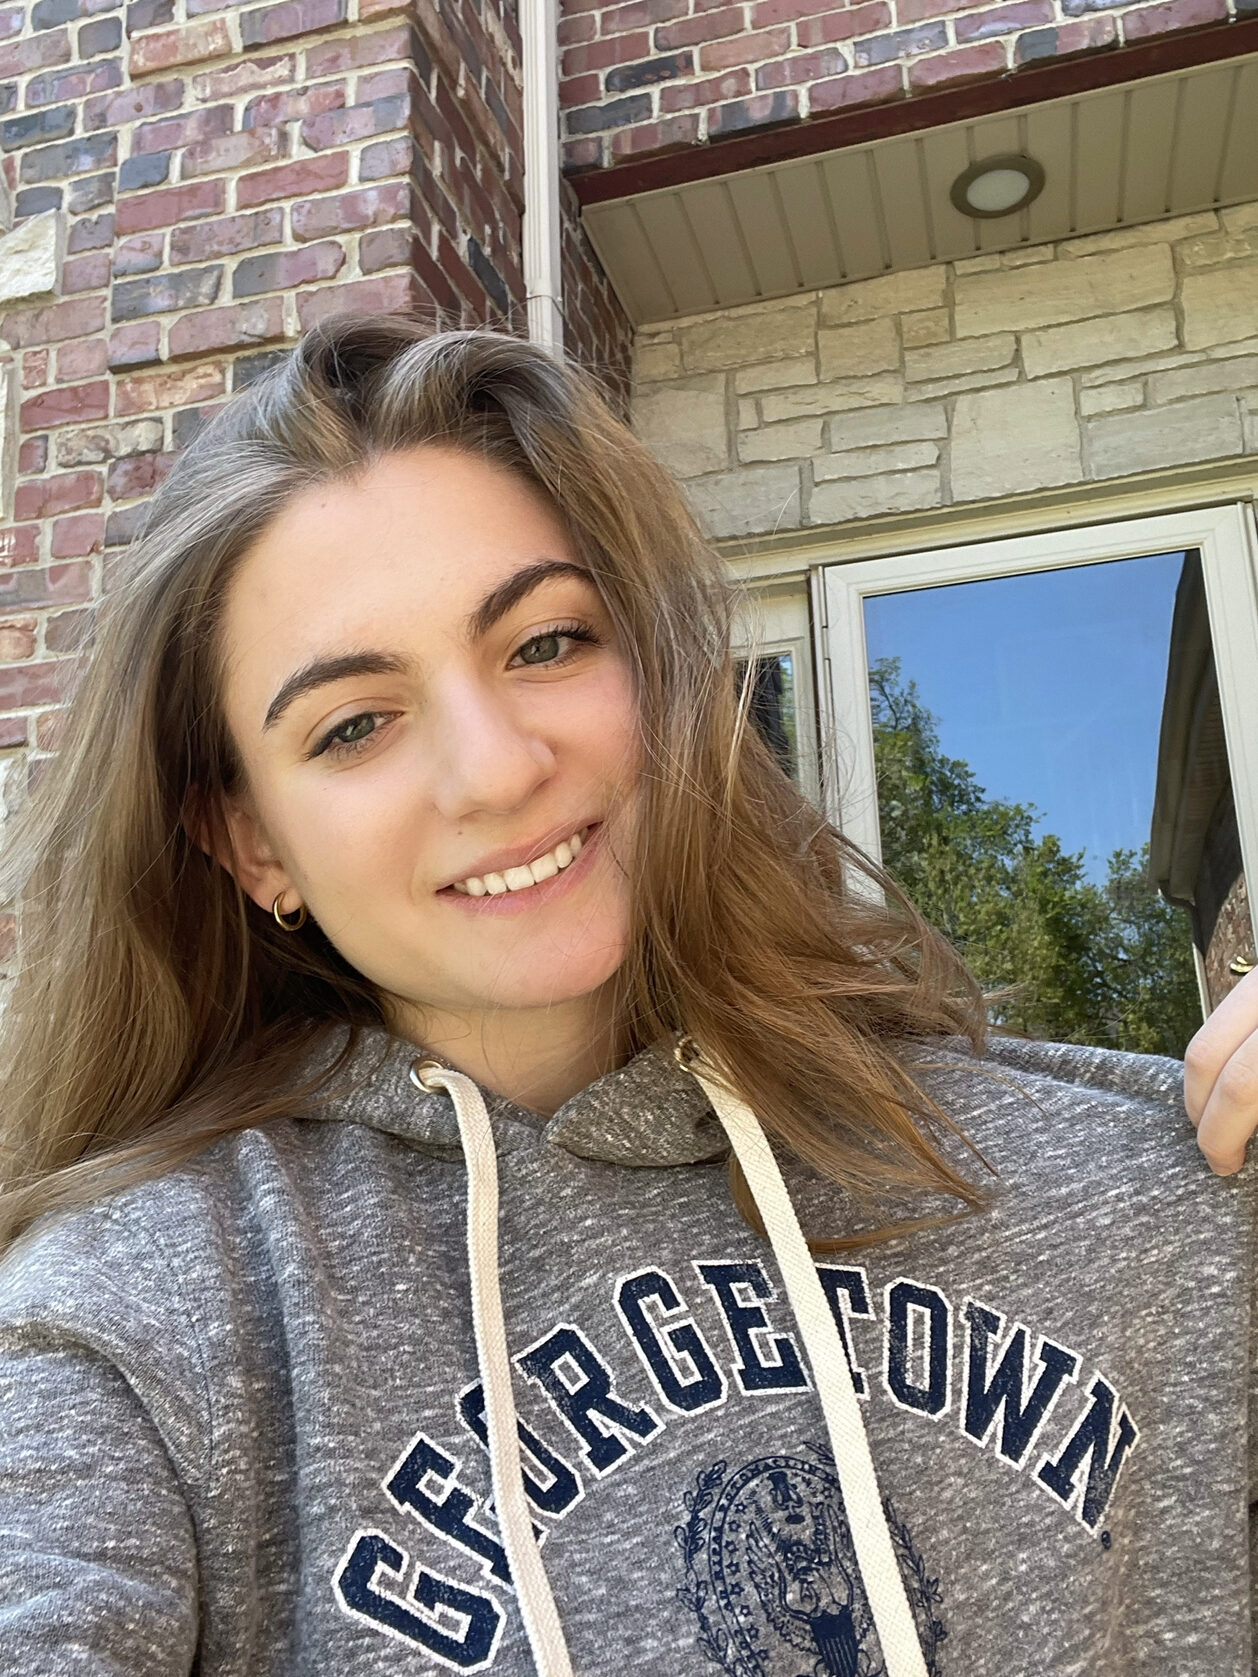 Ava smiles in her selfie as she pulls up one side of her grey hoodie so that you can see the Georgetown logo on it. 